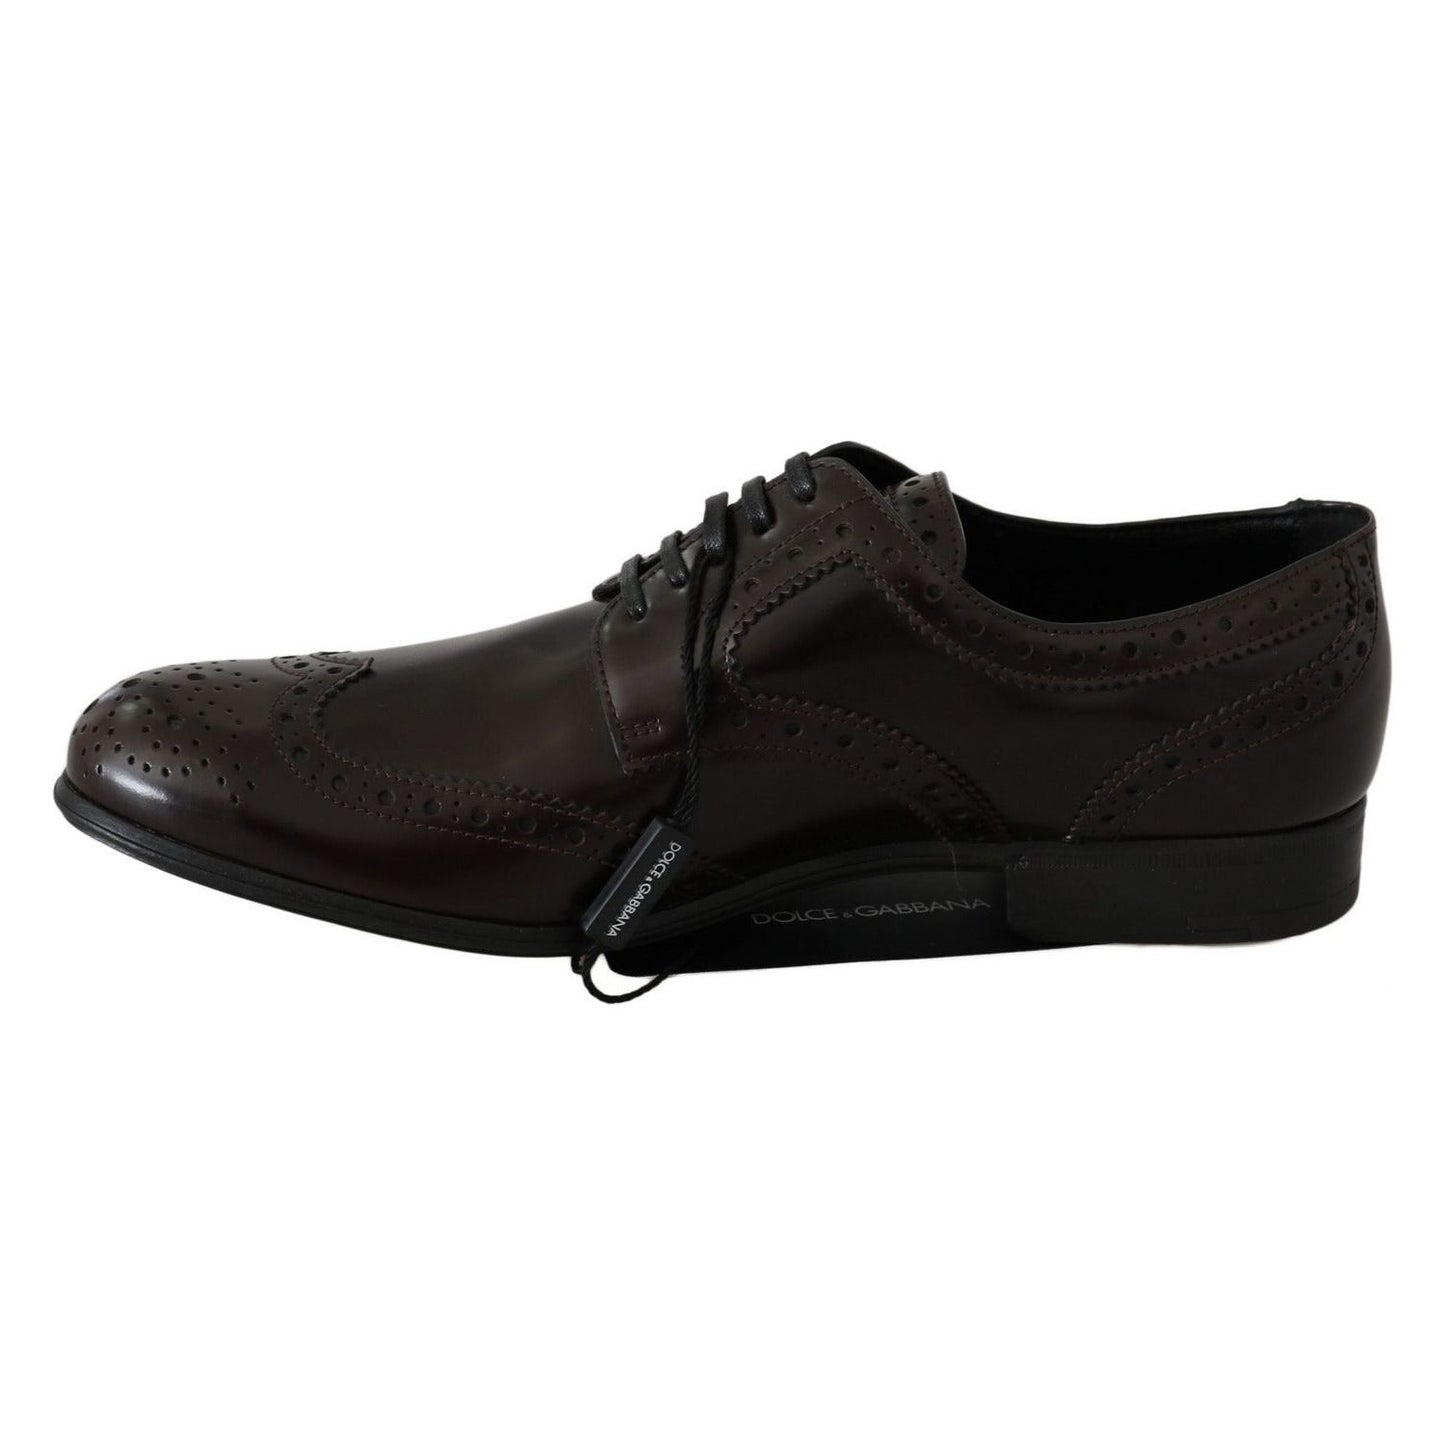 Dolce & Gabbana Elegant Brown Leather Oxford Flats brown-leather-broques-oxford-wingtip-shoes